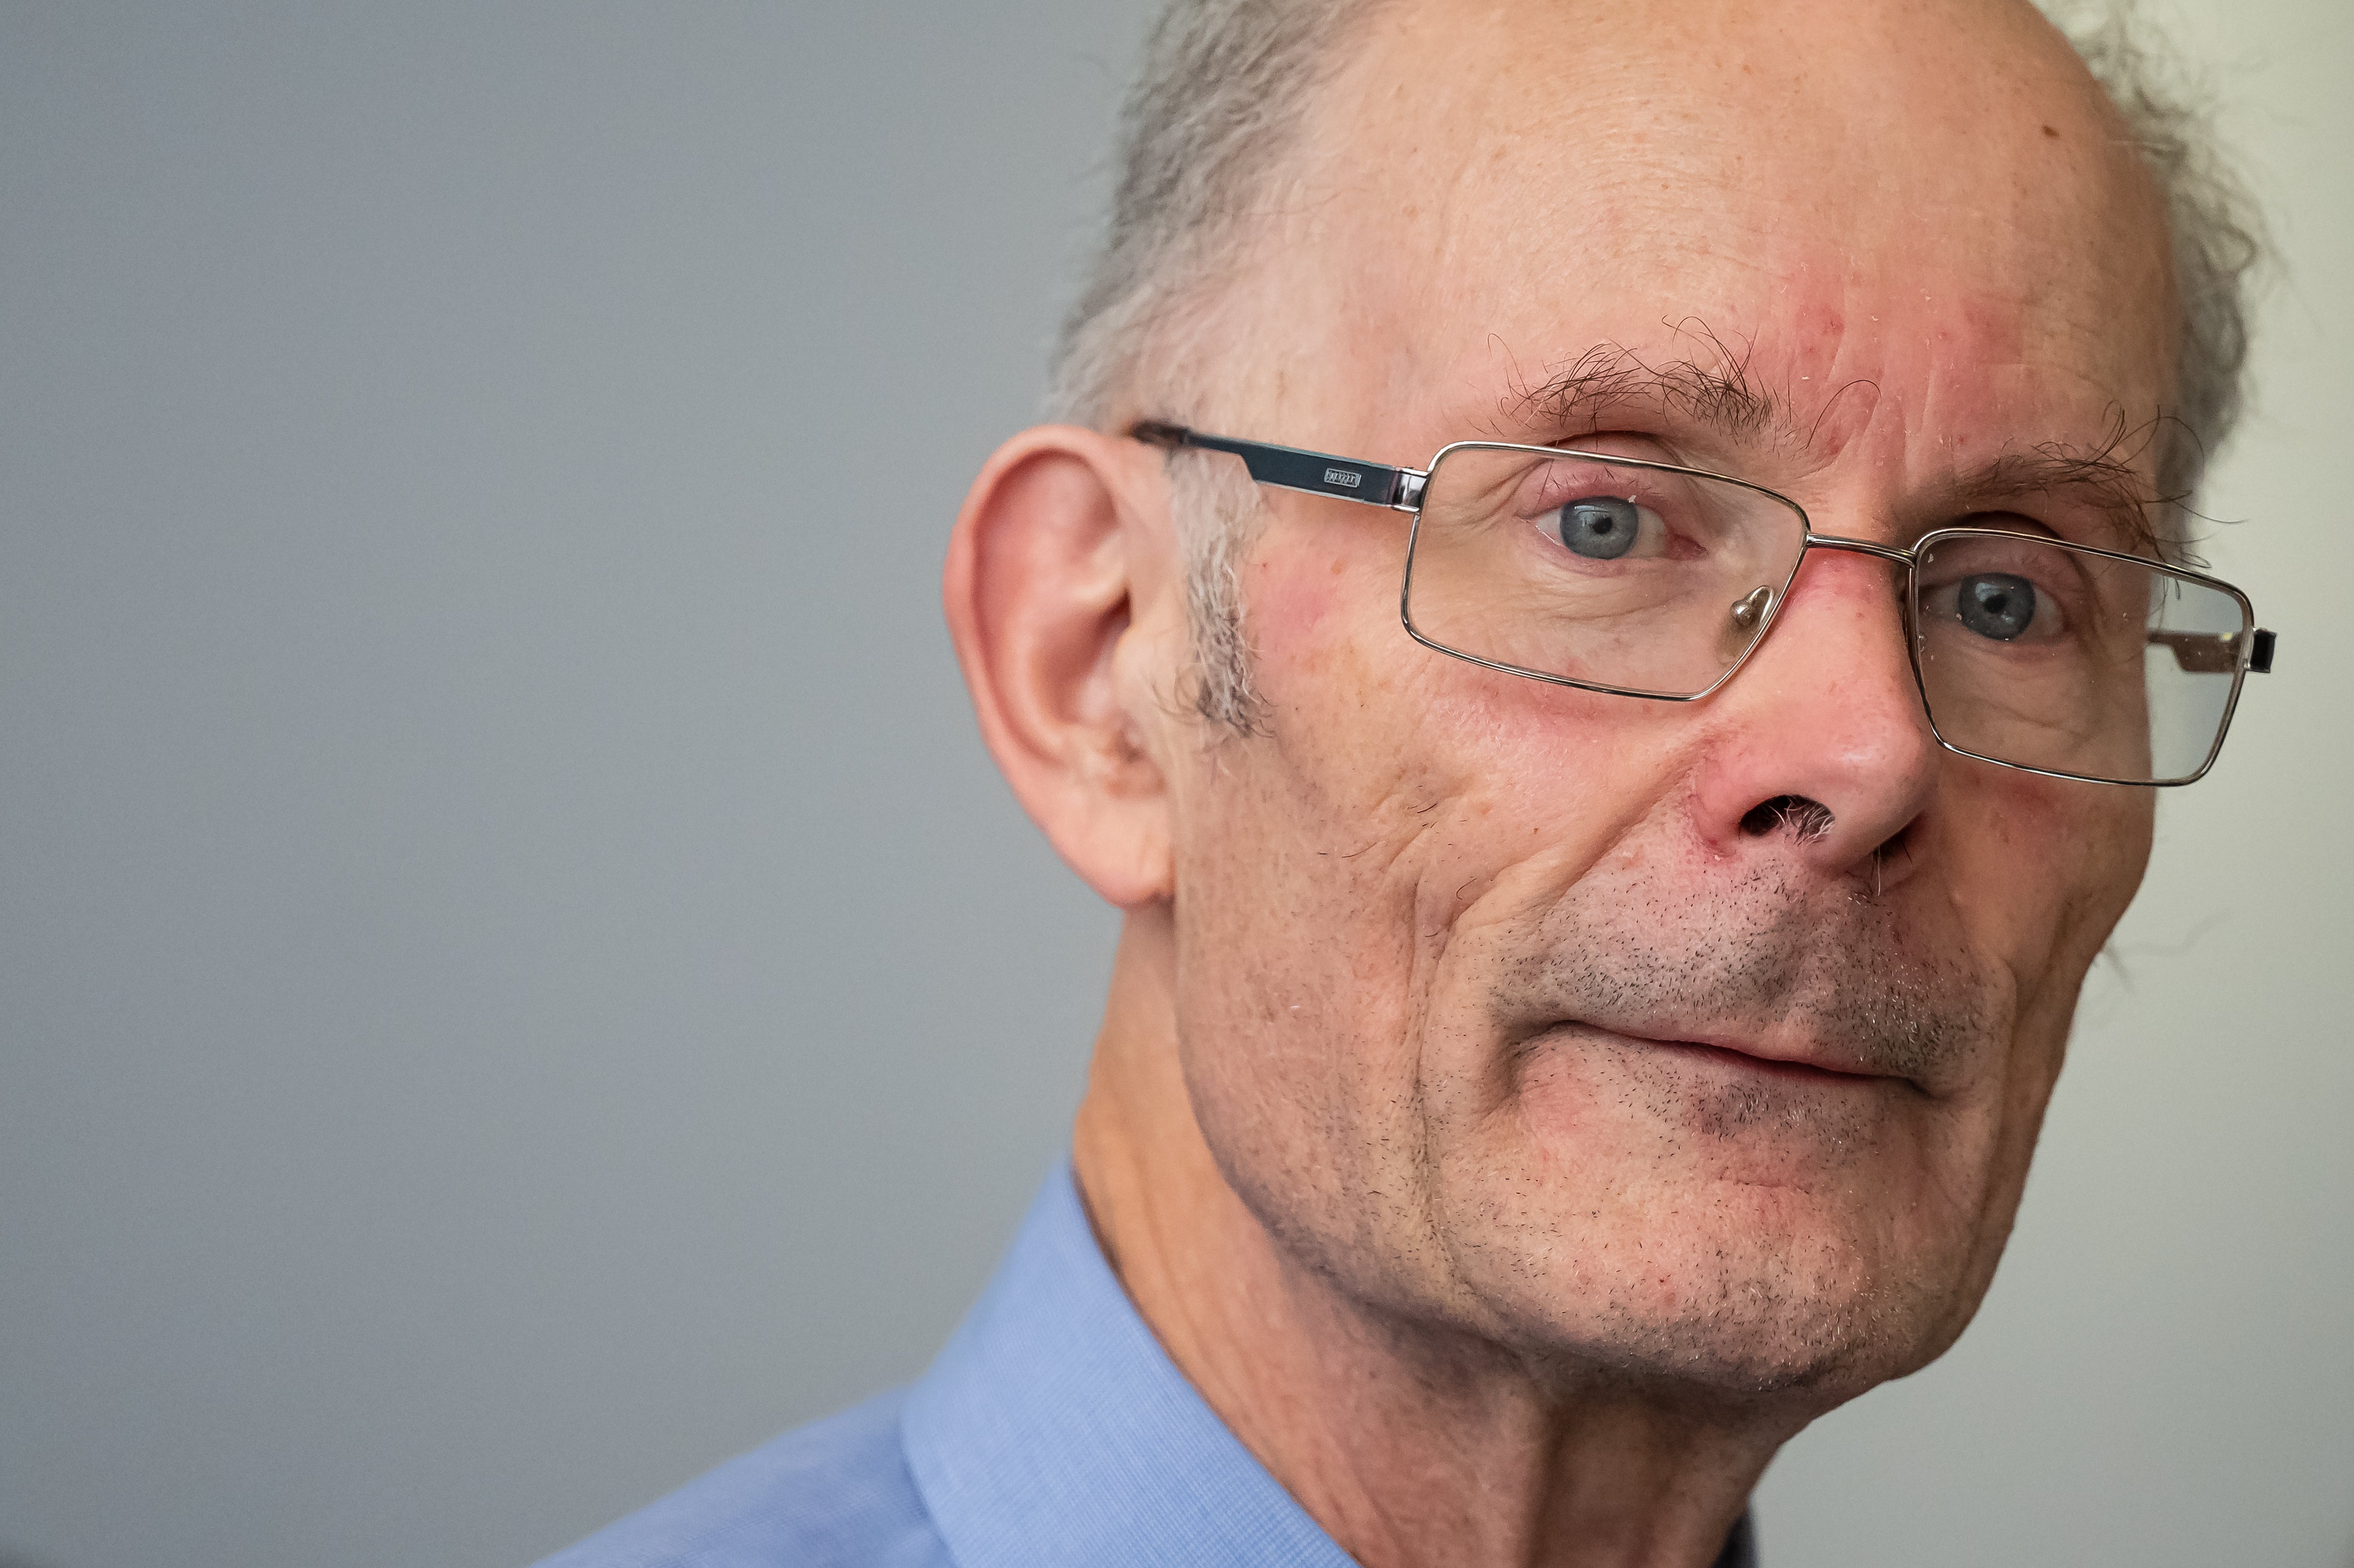 polls, john curtice, conservatives, parliament, jeremy corbyn, labour, history, tory, john curtice warns sunak that tory election victory would ‘biggest turnaround in history’